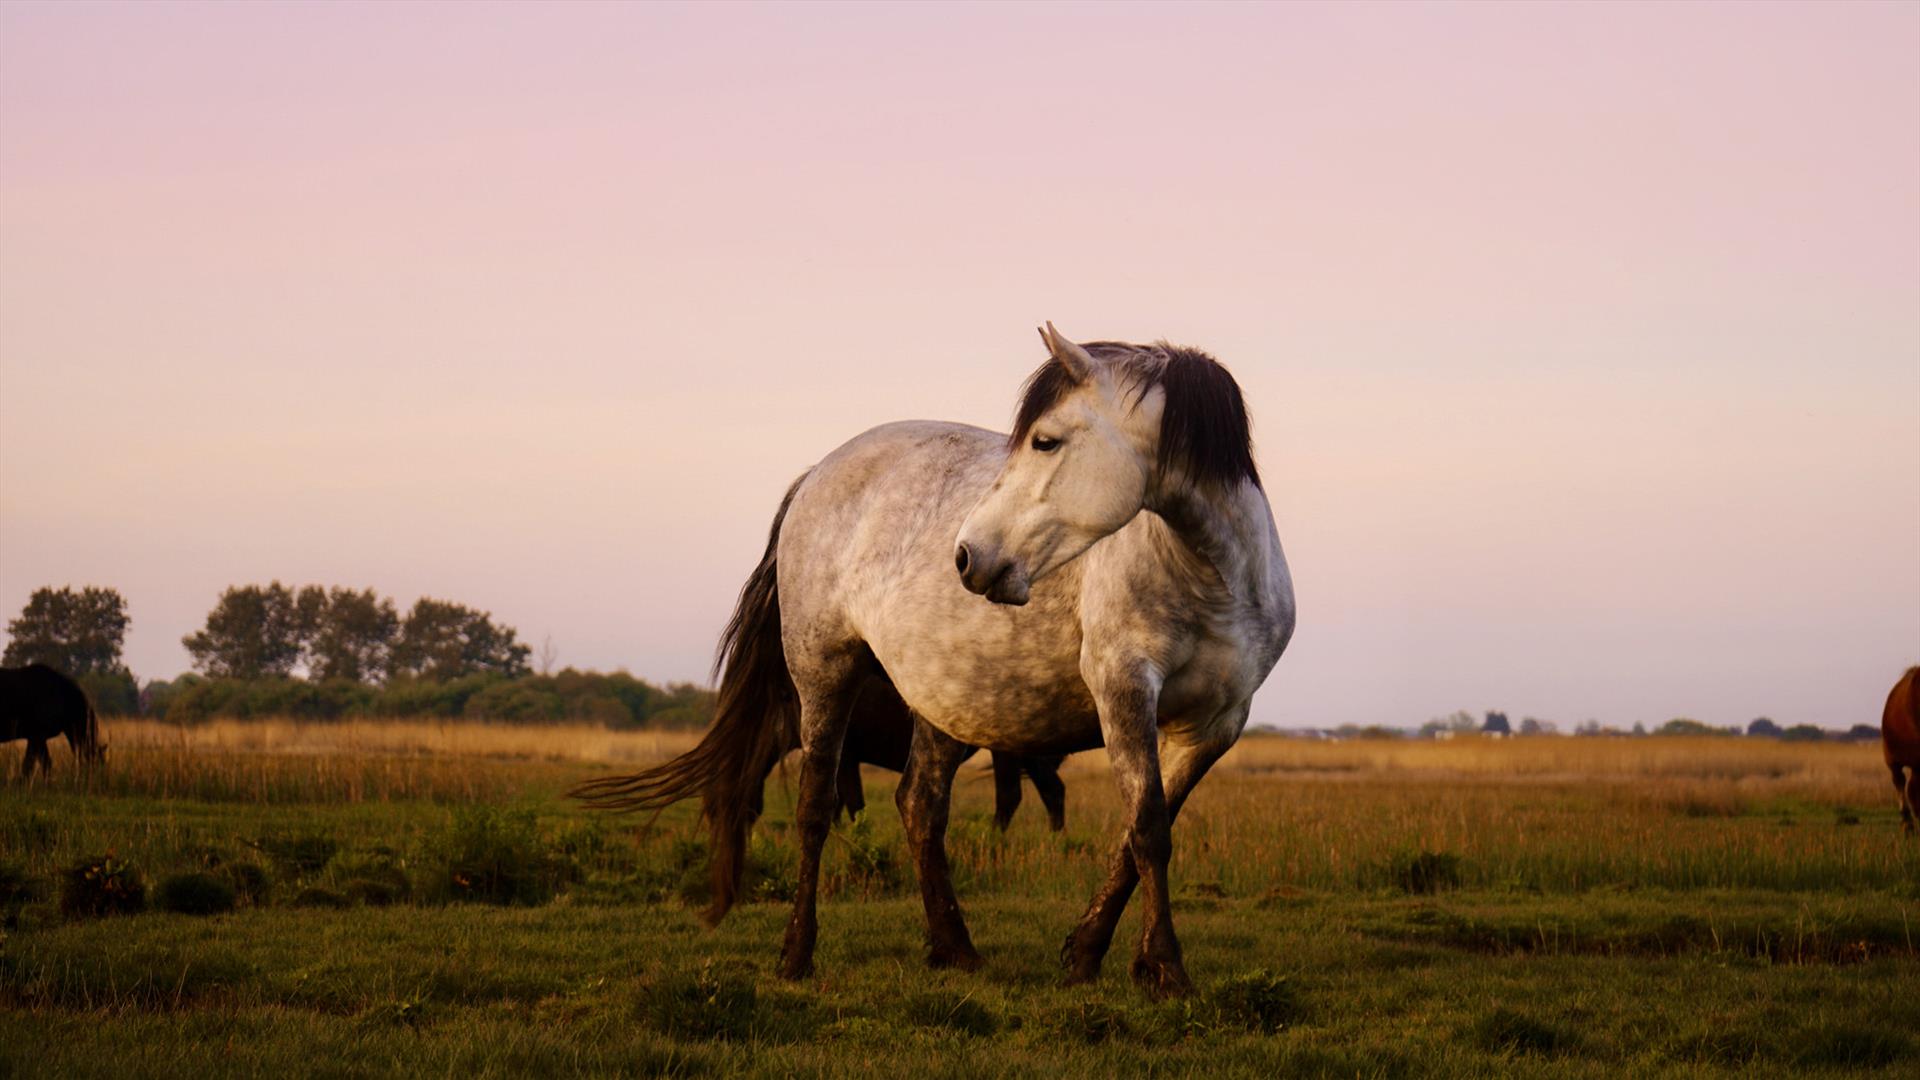 Majestic horse at stanpit marsh with pink sunset behind